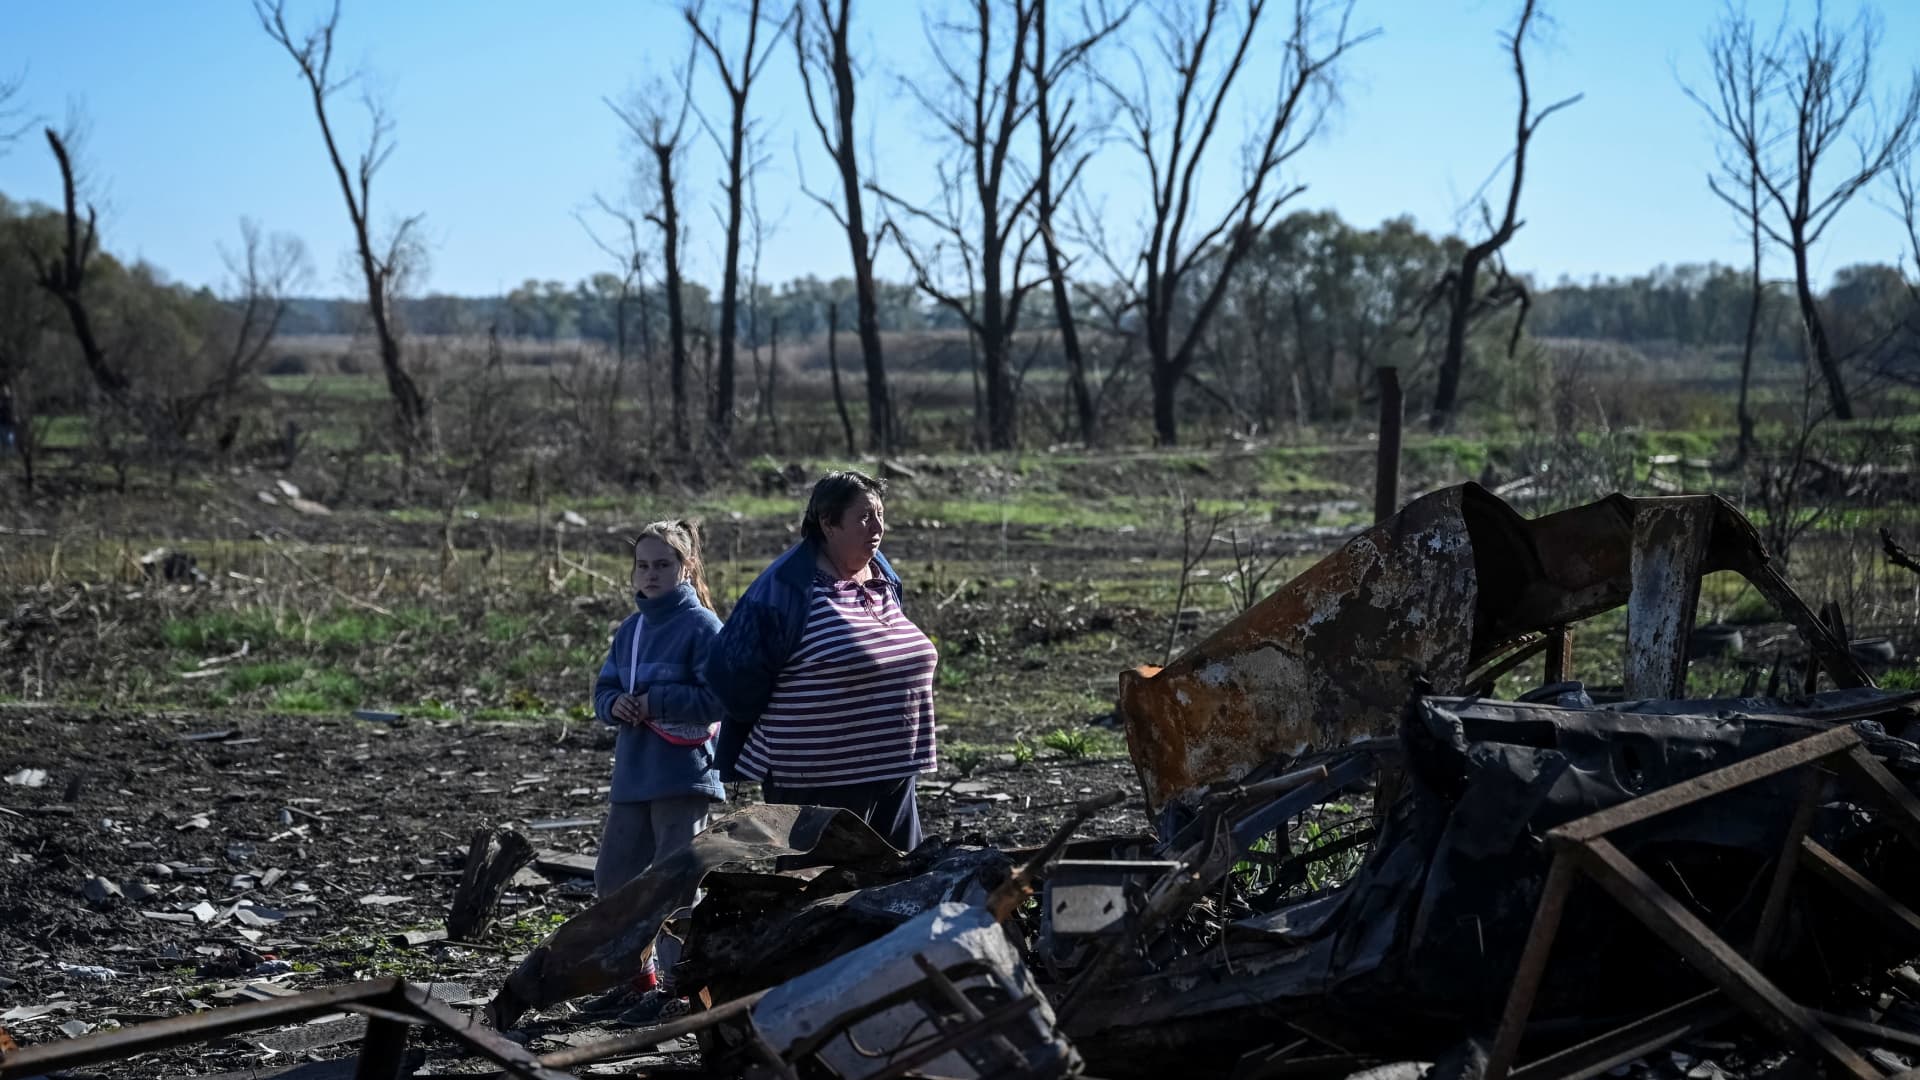 Local residents Natalia, 59, and her granddaughter Ilona, 9, stand on ruins of their house, amid Russia's attack on Ukraine, in Kupiansk Vuzlovyi, Ukraine October 17, 2022.